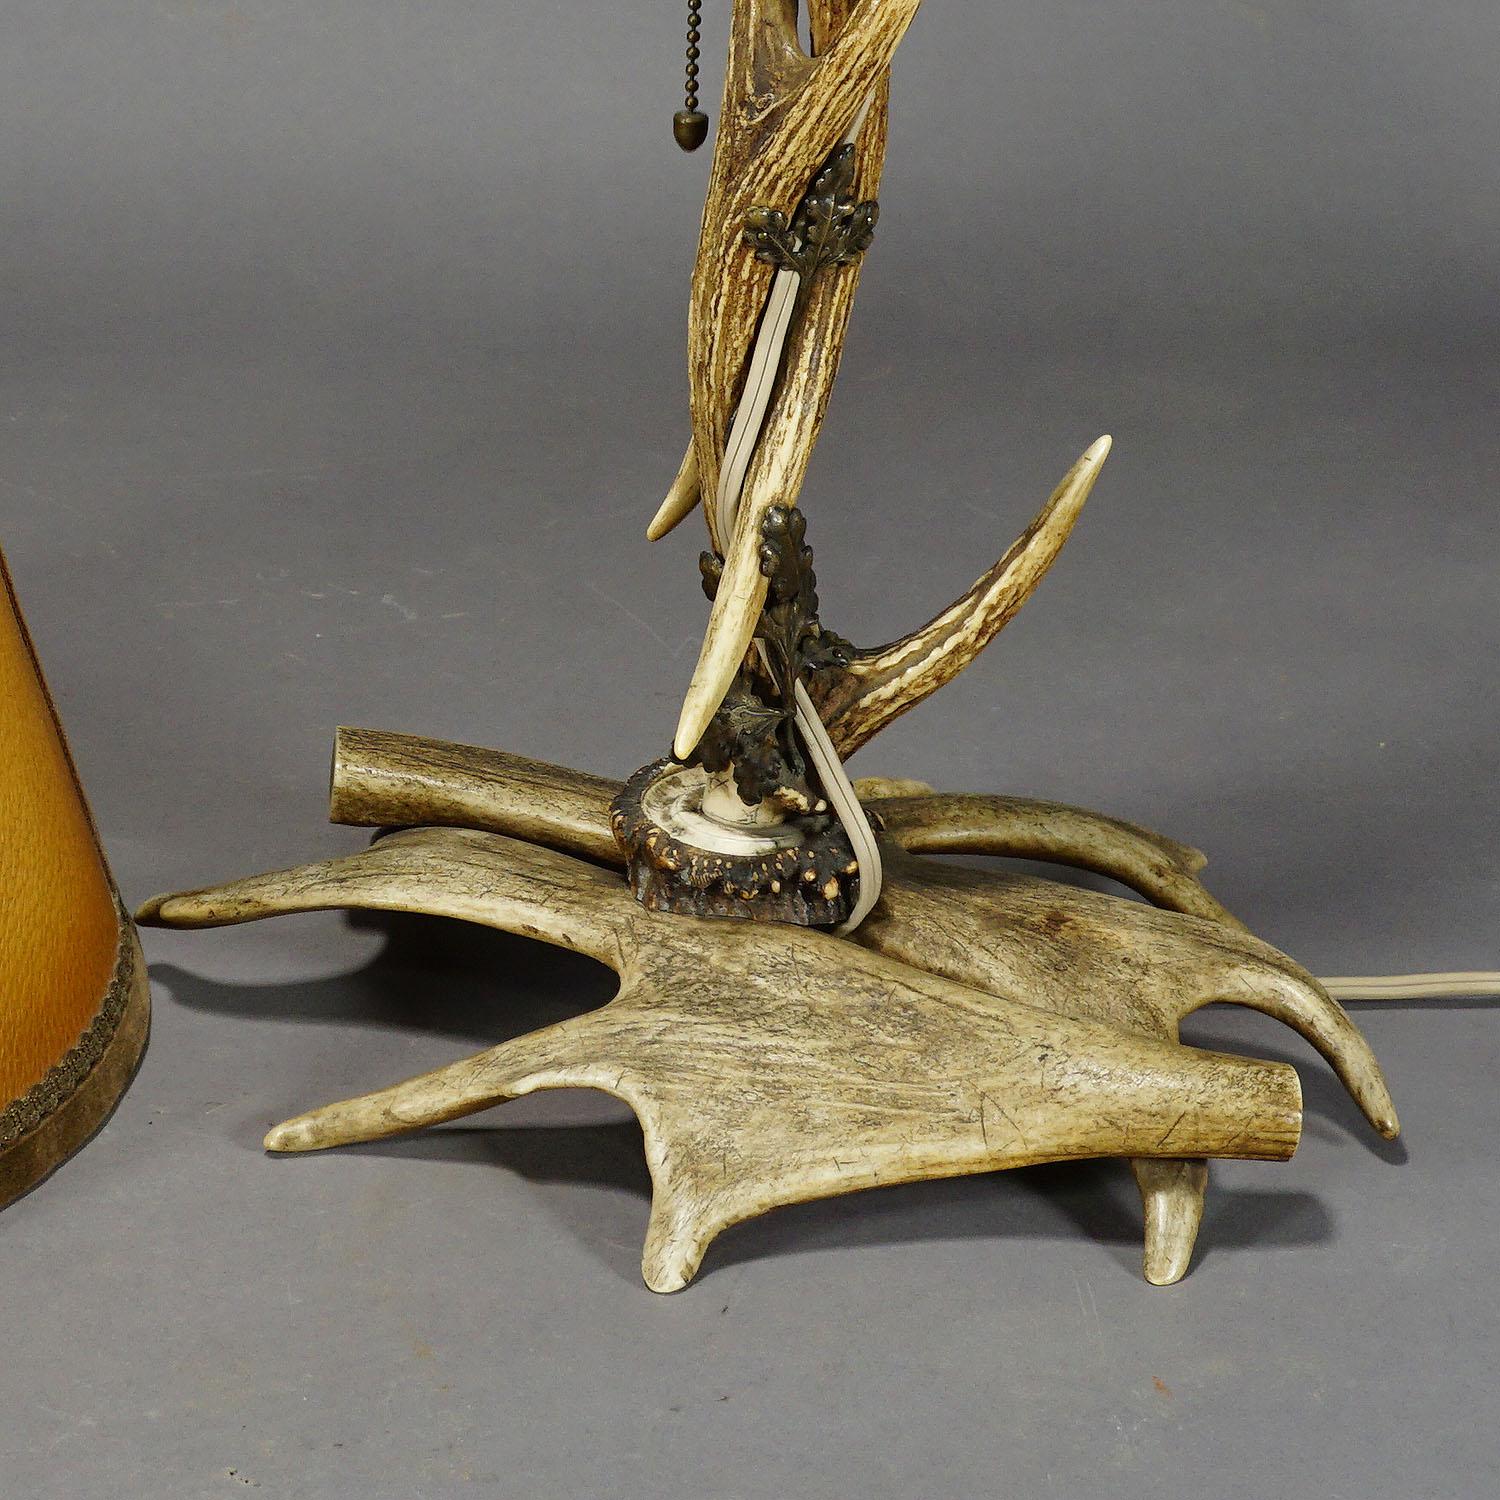 A large antler desk lamp made of deer and Virginia deer antlers, with brass decorations representing oak leaves. Manufactured circa 1920. Original antique shade (can be replaced).

Measures: height 22.44